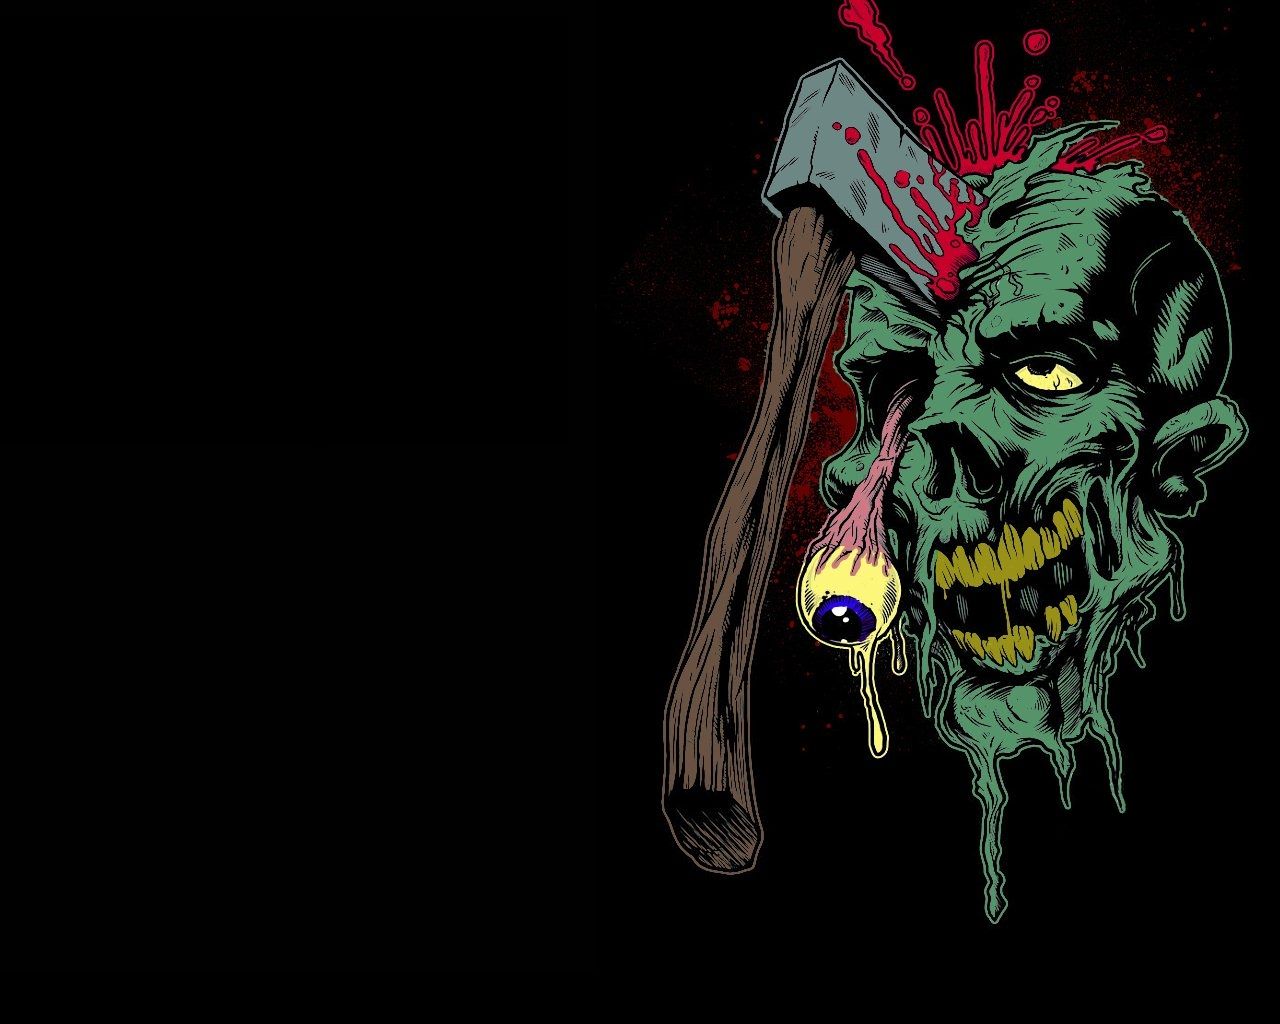 Zombie Background. Awesome Zombie Wallpaper, Funny Zombie Wallpaper and Zombie Wallpaper